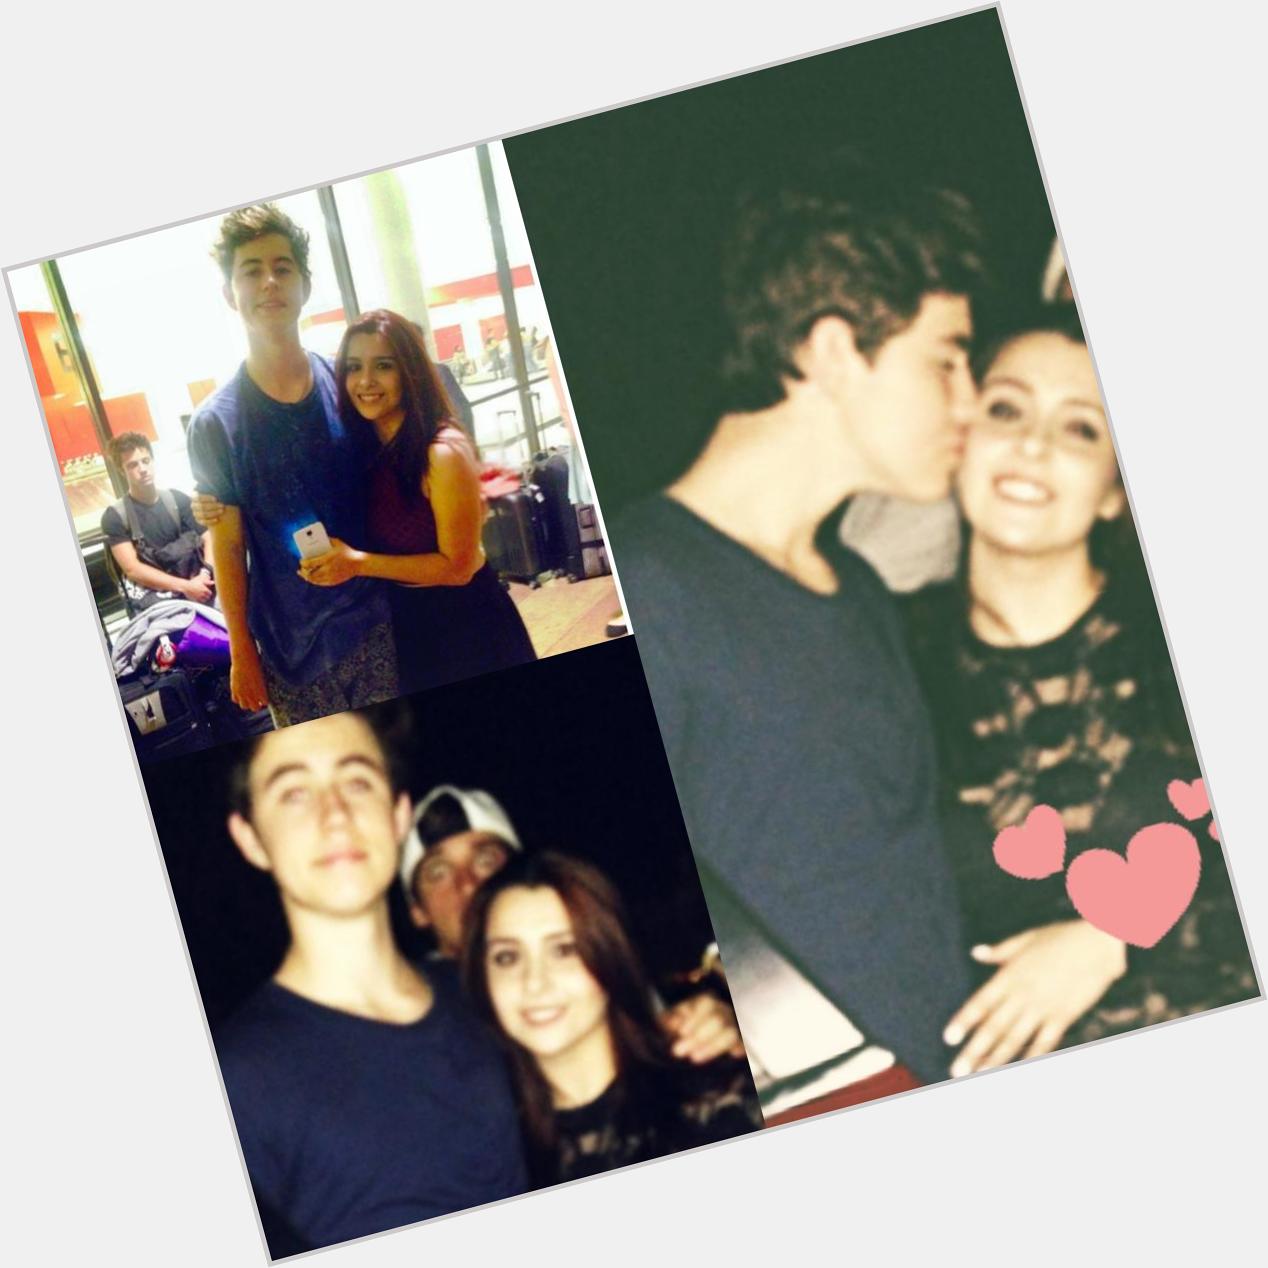 Happy Birthday to my babe Nash Grier. Hope you have a great day. I you babe. YAY you\re almost LEGAL 